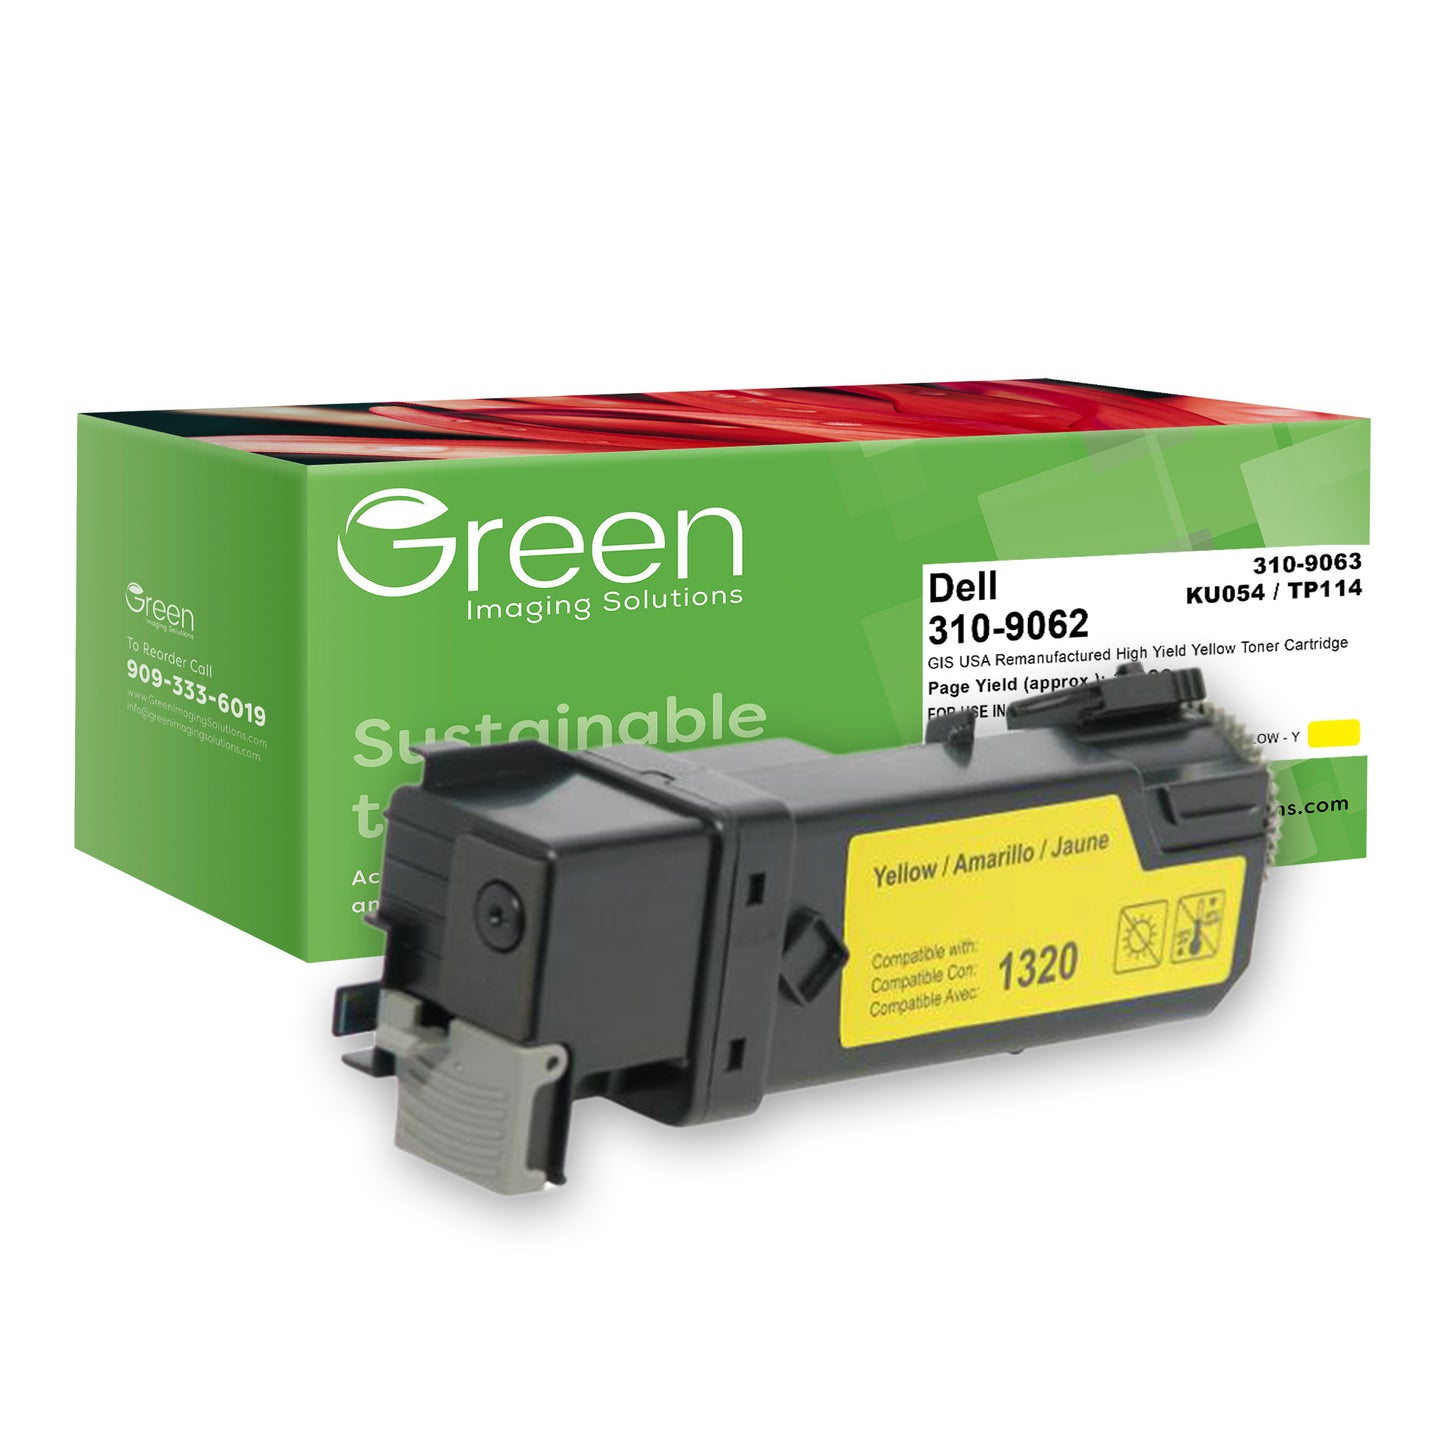 Green Imaging Solutions USA Remanufactured Non-OEM New High Yield Yellow Toner Cartridge for Dell 1320